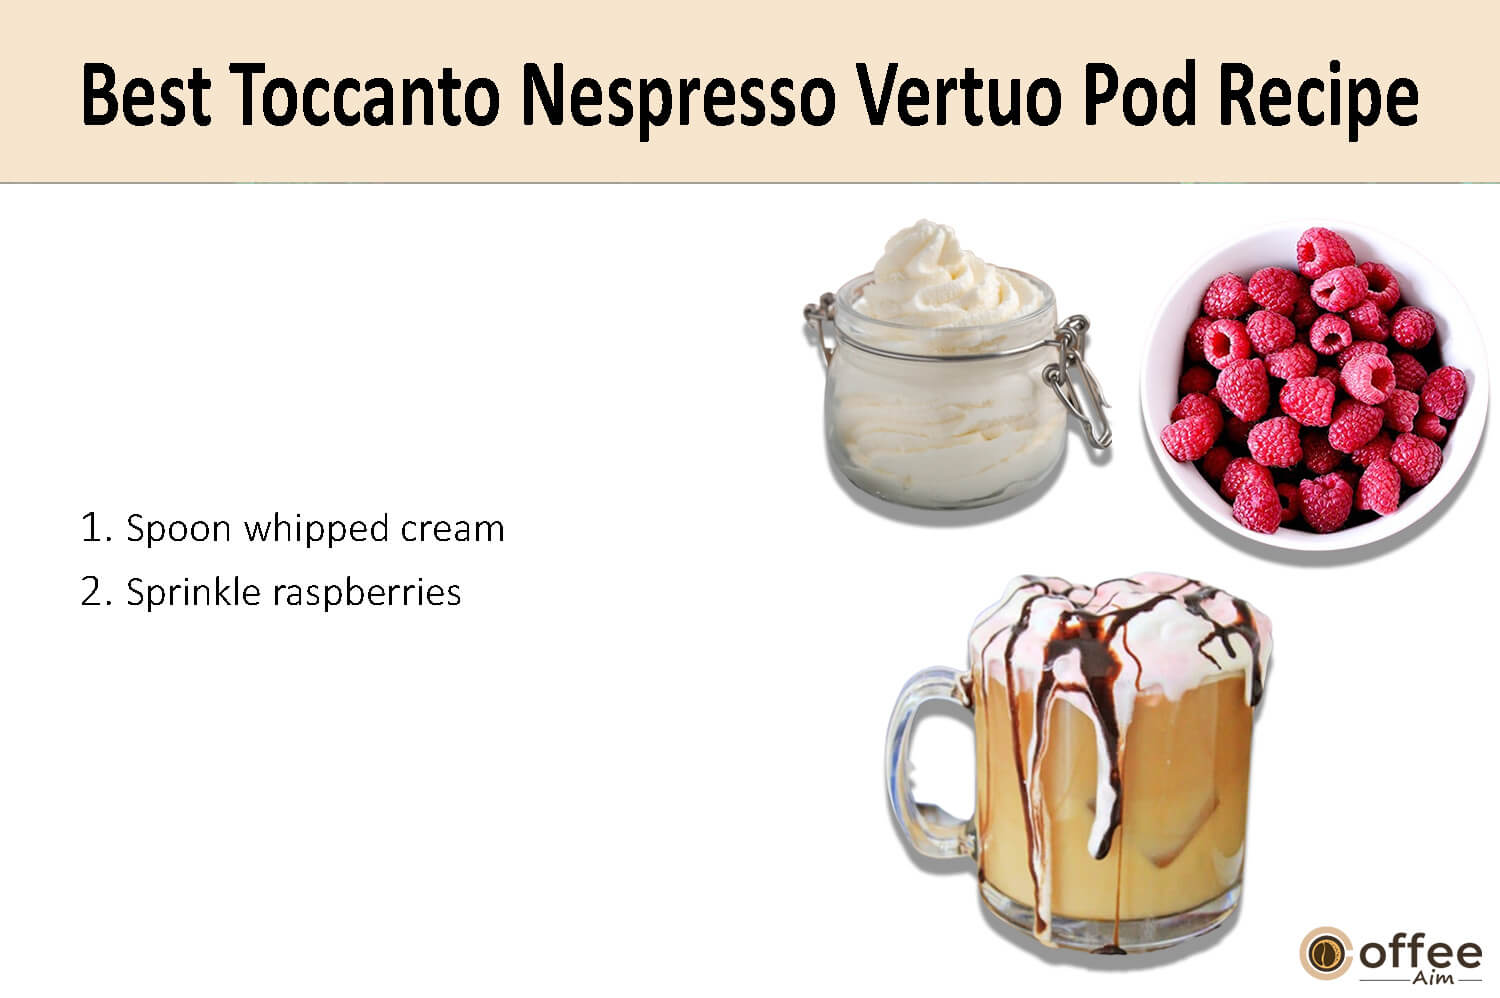 In this image, I clarify the preparation instructions for crafting the finest Toccanto Nespresso Vertuo coffee pod.